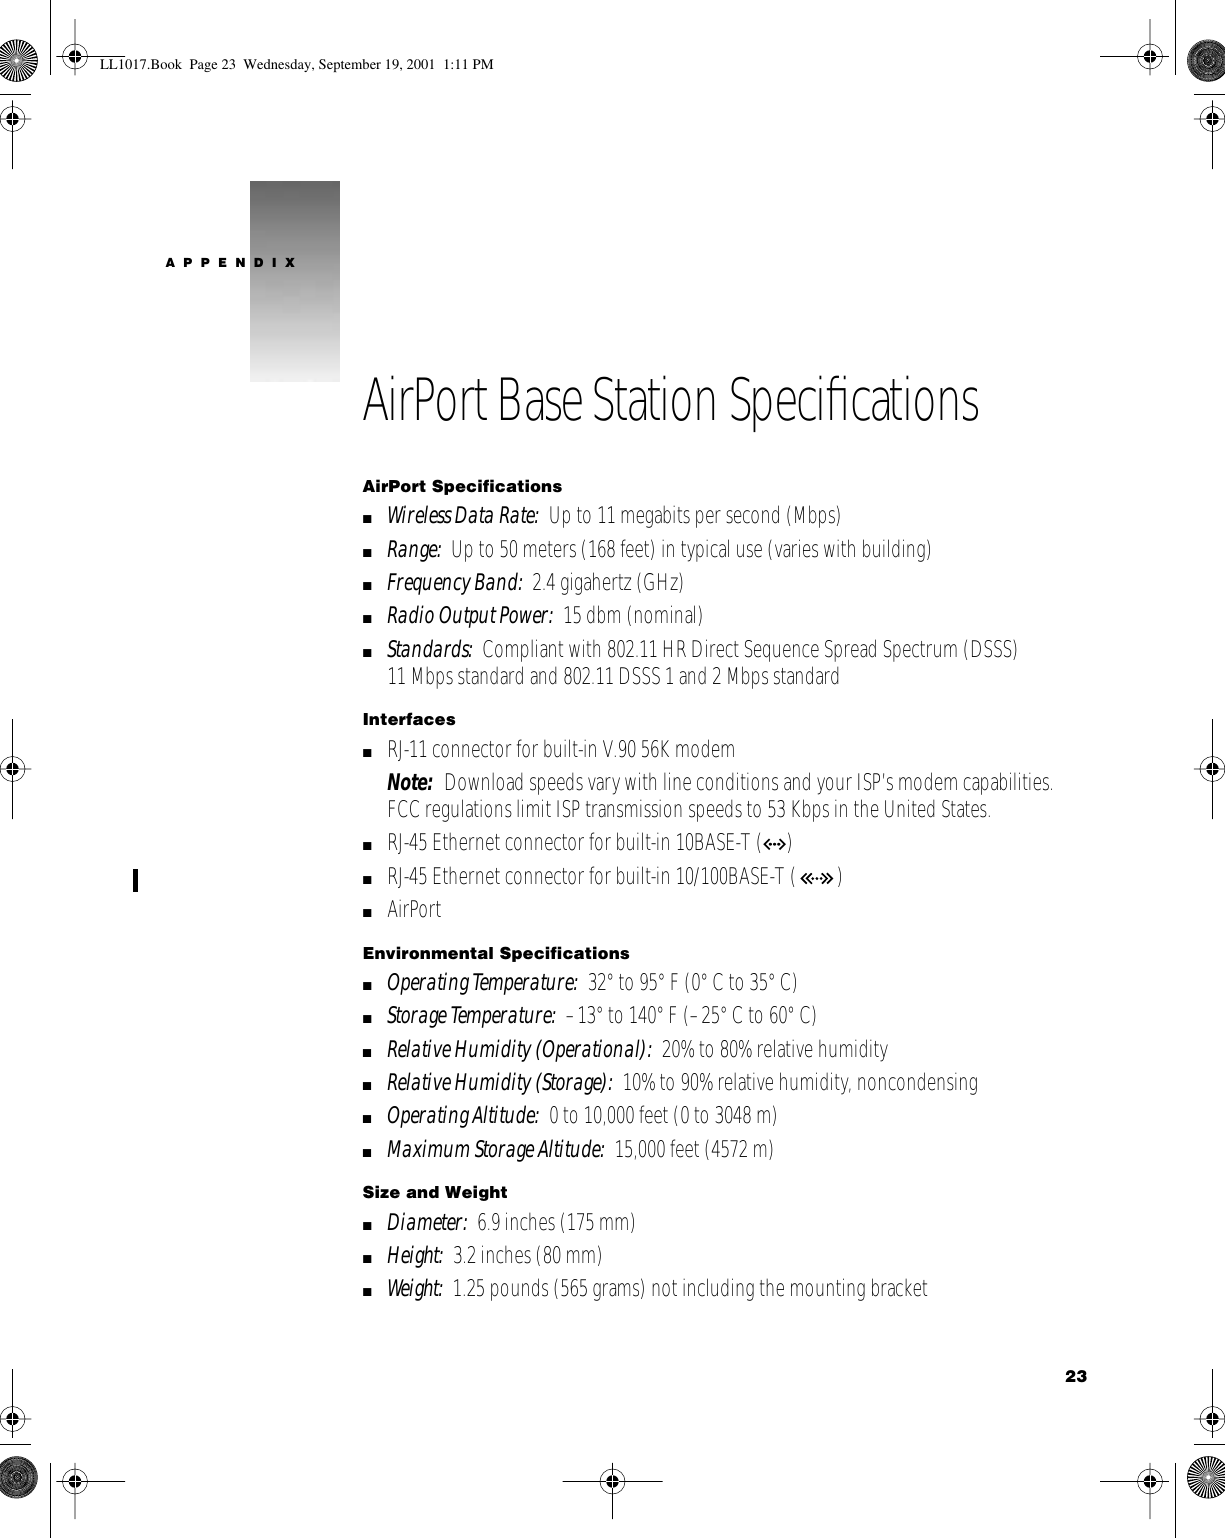  23APPENDIXAirPort Base Station SpeciﬁcationsAirPort SpecificationsmWireless Data Rate:  Up to 11 megabits per second (Mbps)mRange:  Up to 50 meters (168 feet) in typical use (varies with building)mFrequency Band:  2.4 gigahertz (GHz)mRadio Output Power:  15 dbm (nominal)mStandards:  Compliant with 802.11 HR Direct Sequence Spread Spectrum (DSSS) 11 Mbps standard and 802.11 DSSS 1 and 2 Mbps standardInterfacesmRJ-11 connector for built-in V.90 56K modemNote:  Download speeds vary with line conditions and your ISP’s modem capabilities. FCC regulations limit ISP transmission speeds to 53 Kbps in the United States. mRJ-45 Ethernet connector for built-in 10BASE-T (G)mRJ-45 Ethernet connector for built-in 10/100BASE-T ( )mAirPortEnvironmental SpecificationsmOperating Temperature:  32° to 95° F (0° C to 35° C)mStorage Temperature:  –13° to 140° F (–25° C to 60° C)mRelative Humidity (Operational):  20% to 80% relative humiditymRelative Humidity (Storage):  10% to 90% relative humidity, noncondensingmOperating Altitude:  0 to 10,000 feet (0 to 3048 m)mMaximum Storage Altitude:  15,000 feet (4572 m)Size and WeightmDiameter:  6.9 inches (175 mm)mHeight:  3.2 inches (80 mm)mWeight:  1.25 pounds (565 grams) not including the mounting bracketLL1017.Book  Page 23  Wednesday, September 19, 2001  1:11 PM